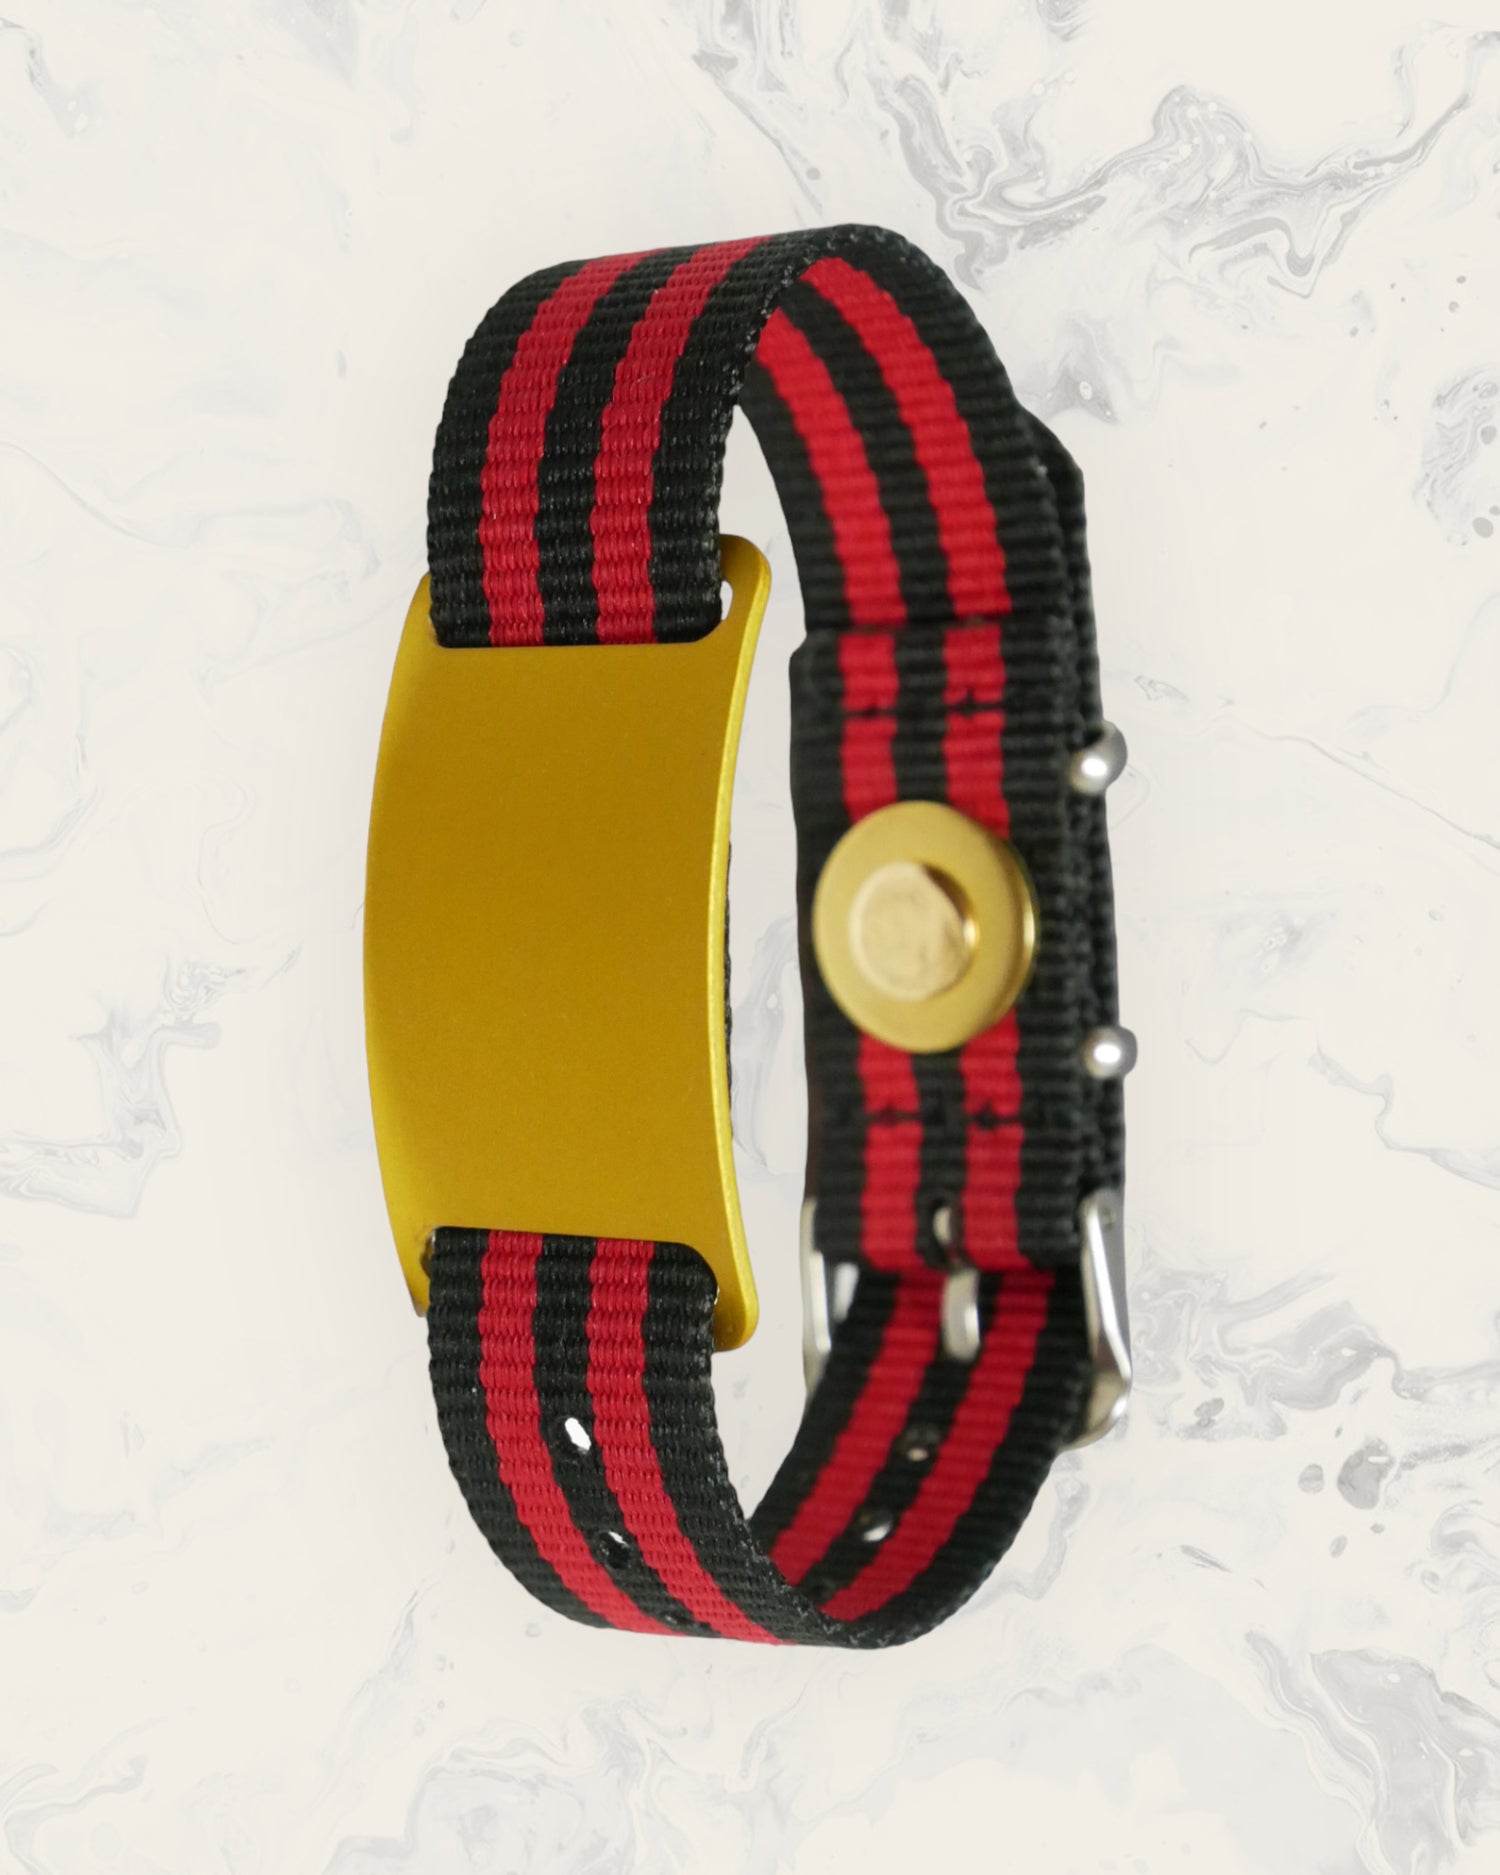 Natural Pain Relief and EMF Protection Bracelet Nylon Band Color Black and Red Striped with a Gold Slider